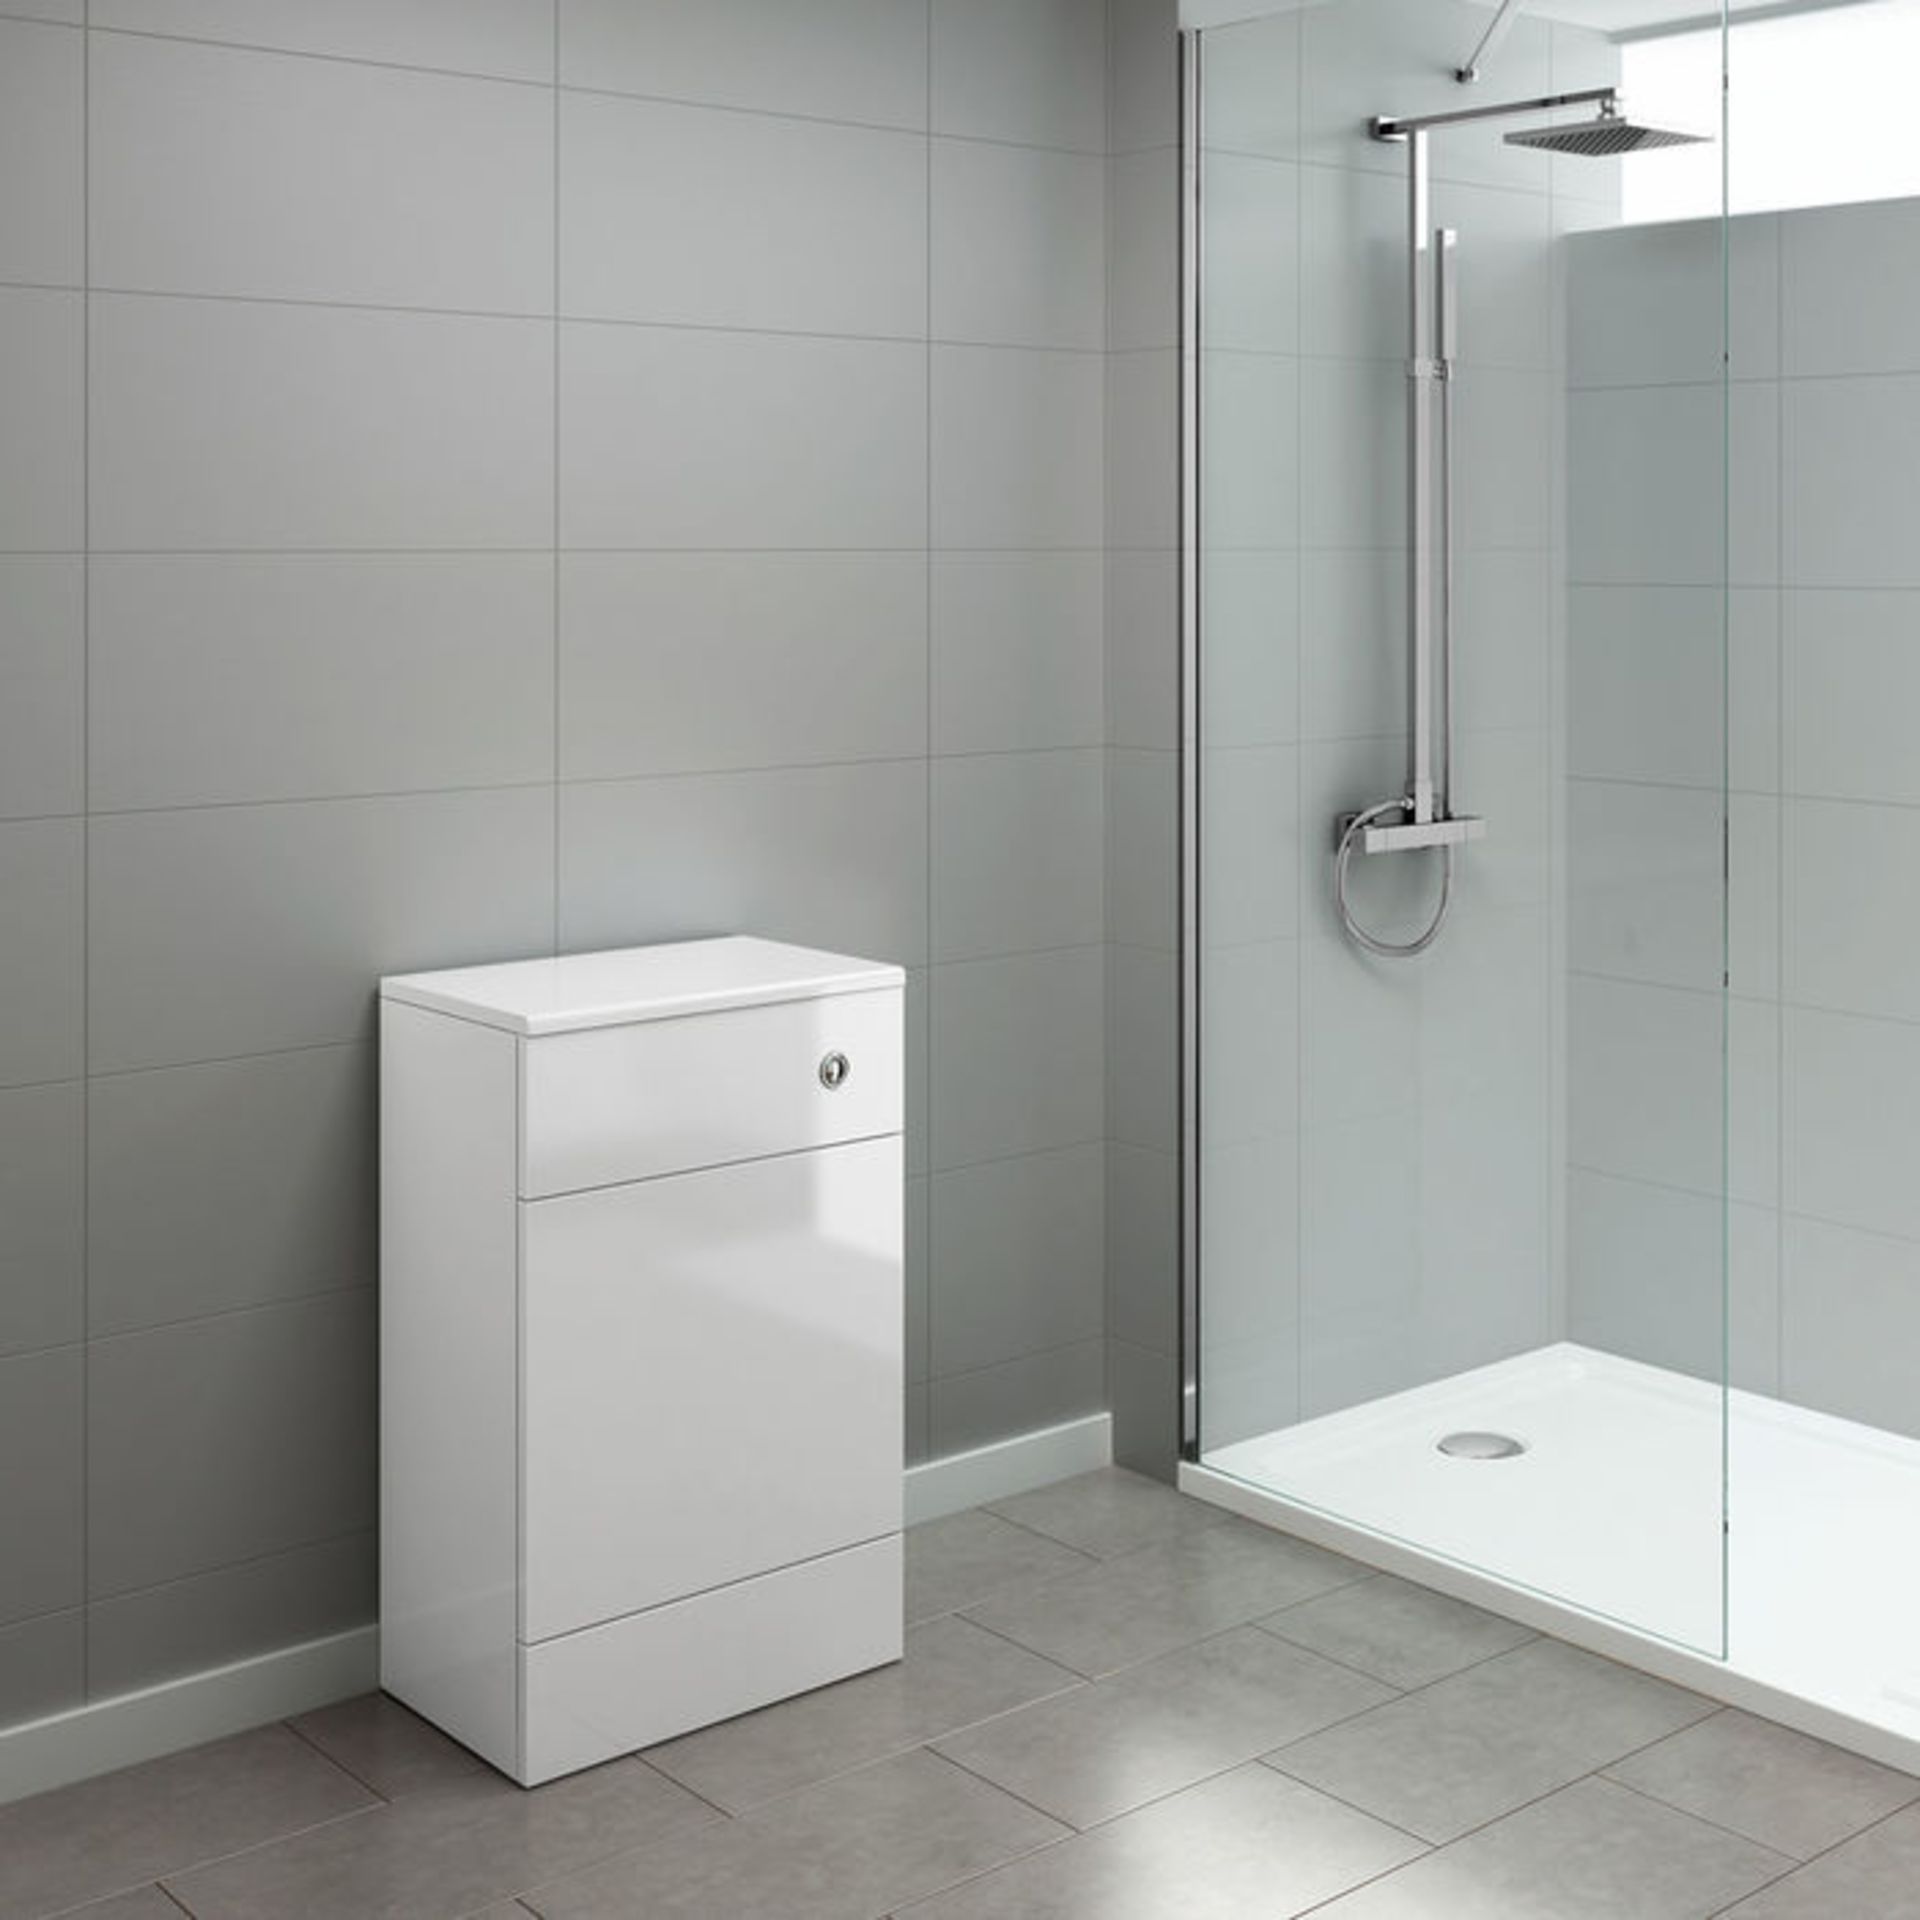 (AL45) 500mm Harper Gloss White Back To Wall Toilet Unit. RRP £109.99. Our discreet unit cleverly - Image 3 of 3